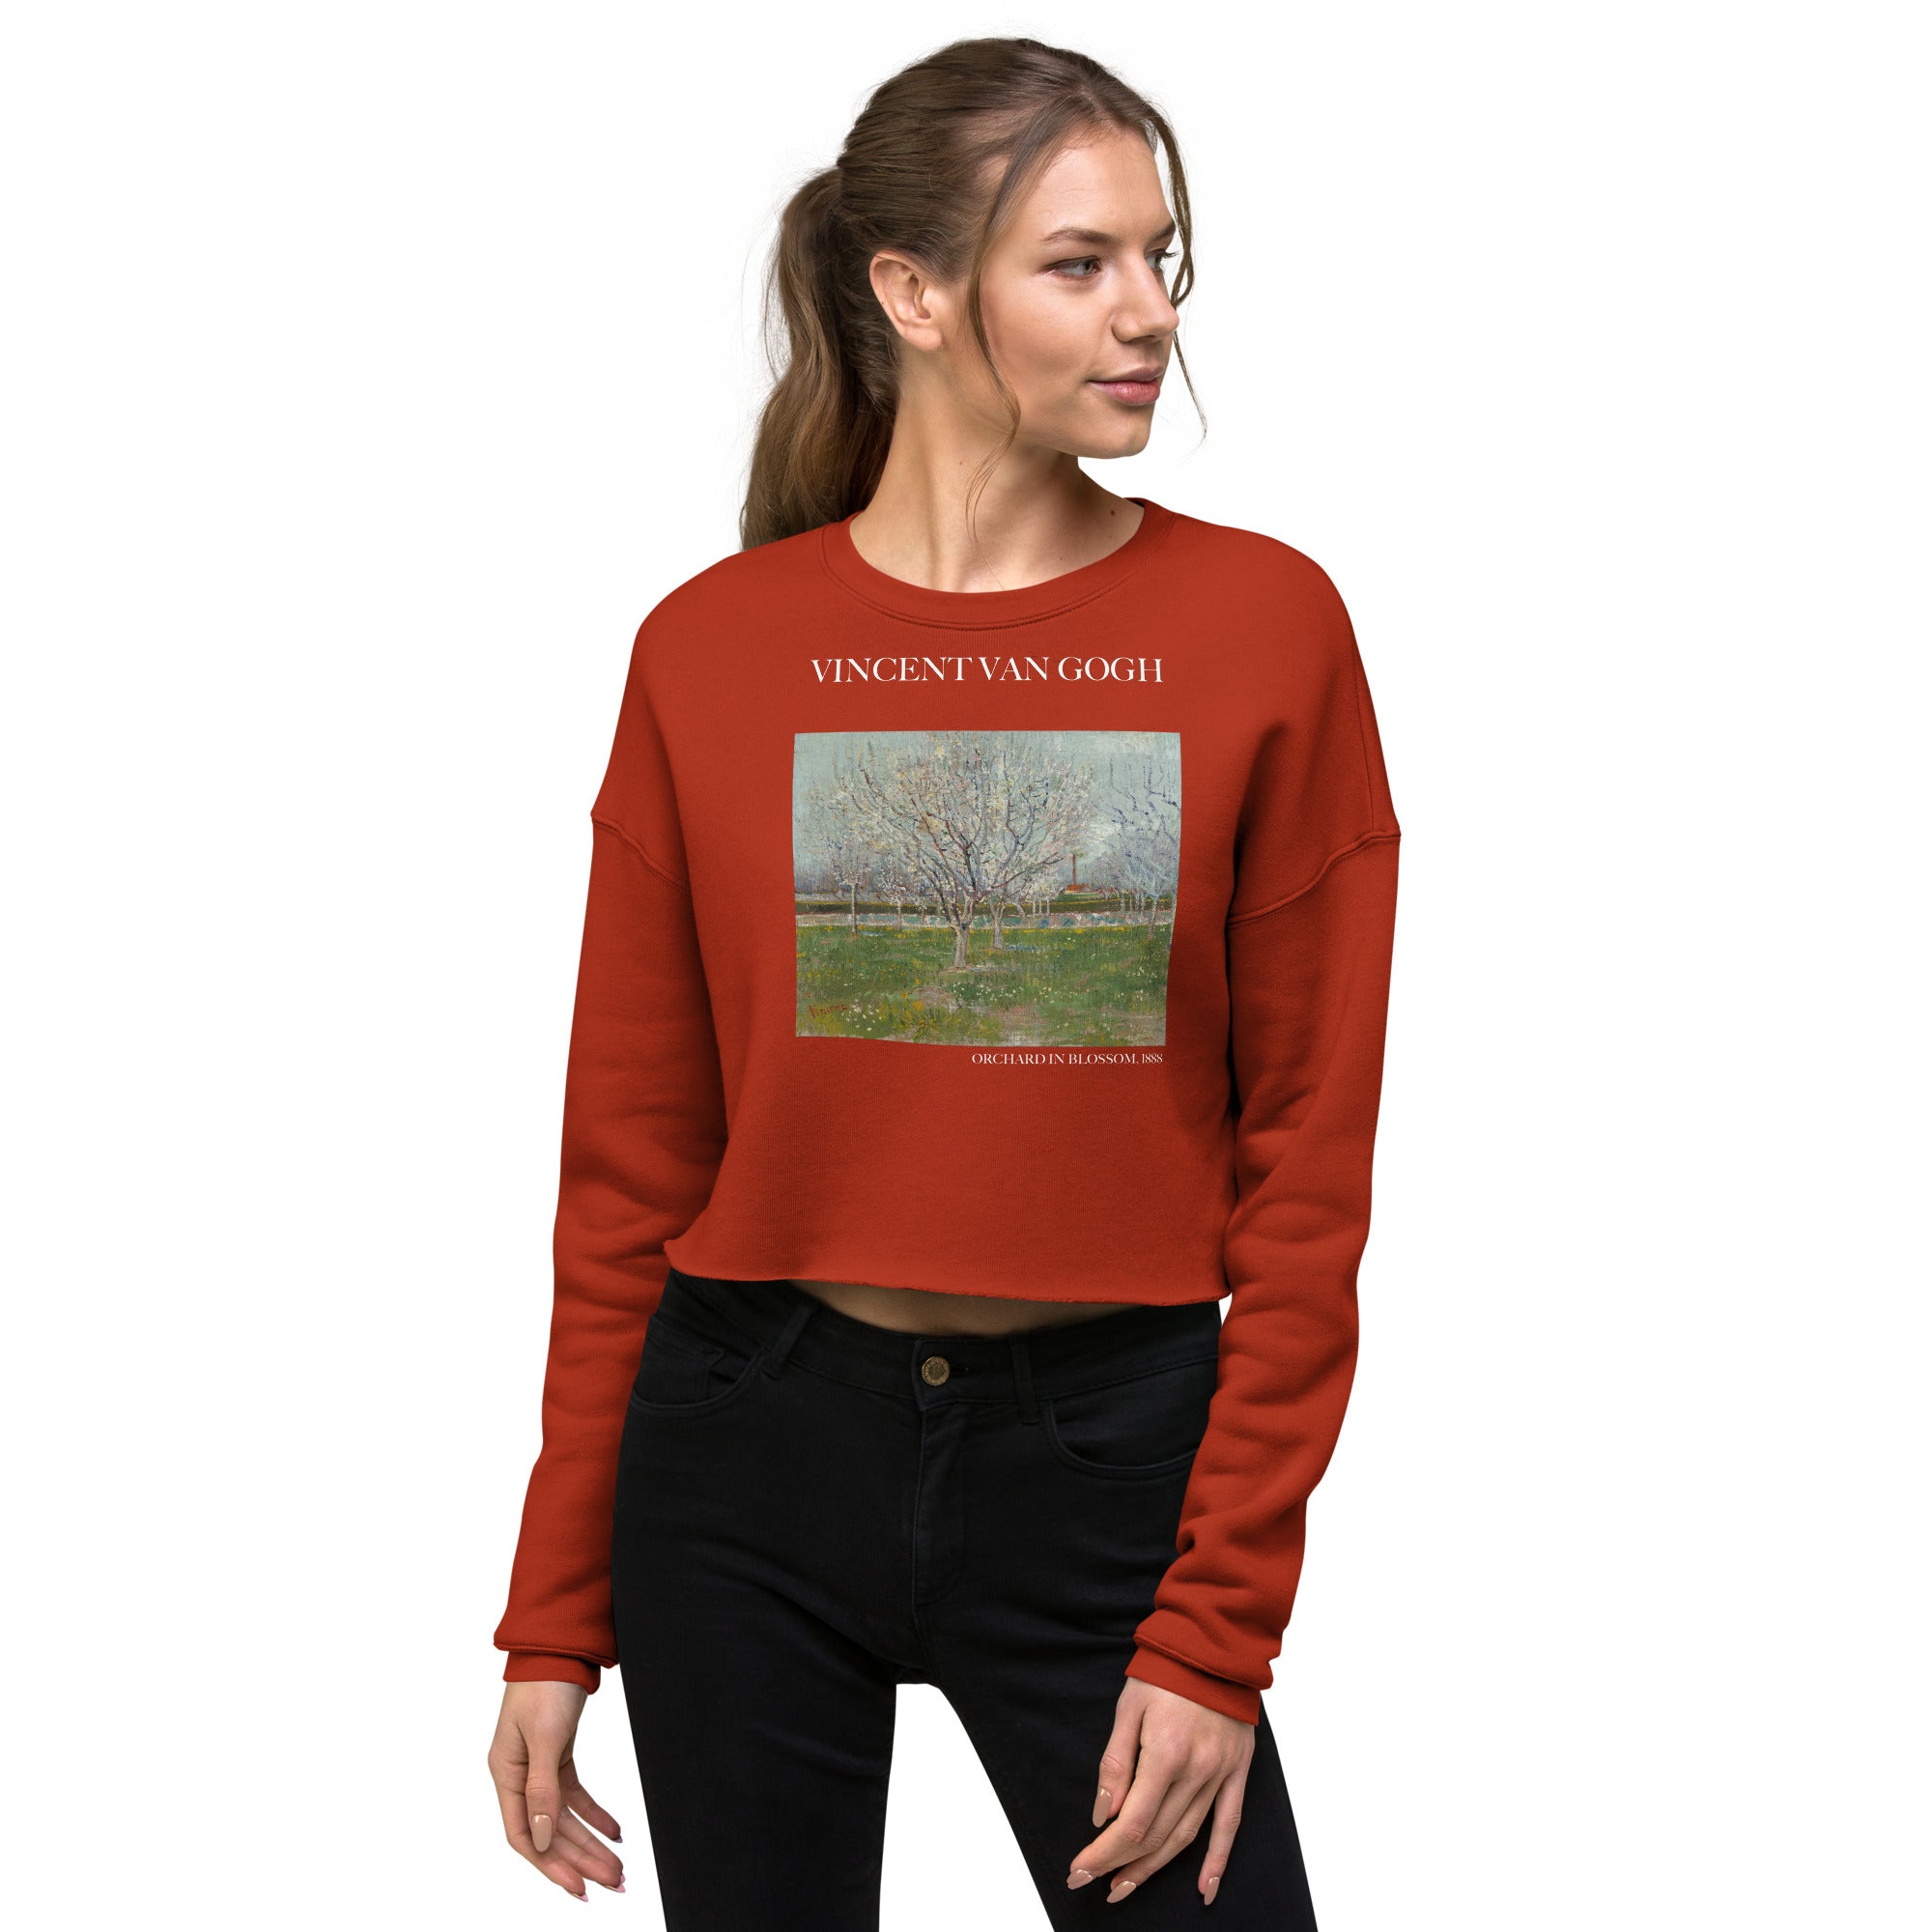 Vincent van Gogh 'Orchard in Blossom' Famous Painting Cropped Sweatshirt | Premium Art Cropped Sweatshirt